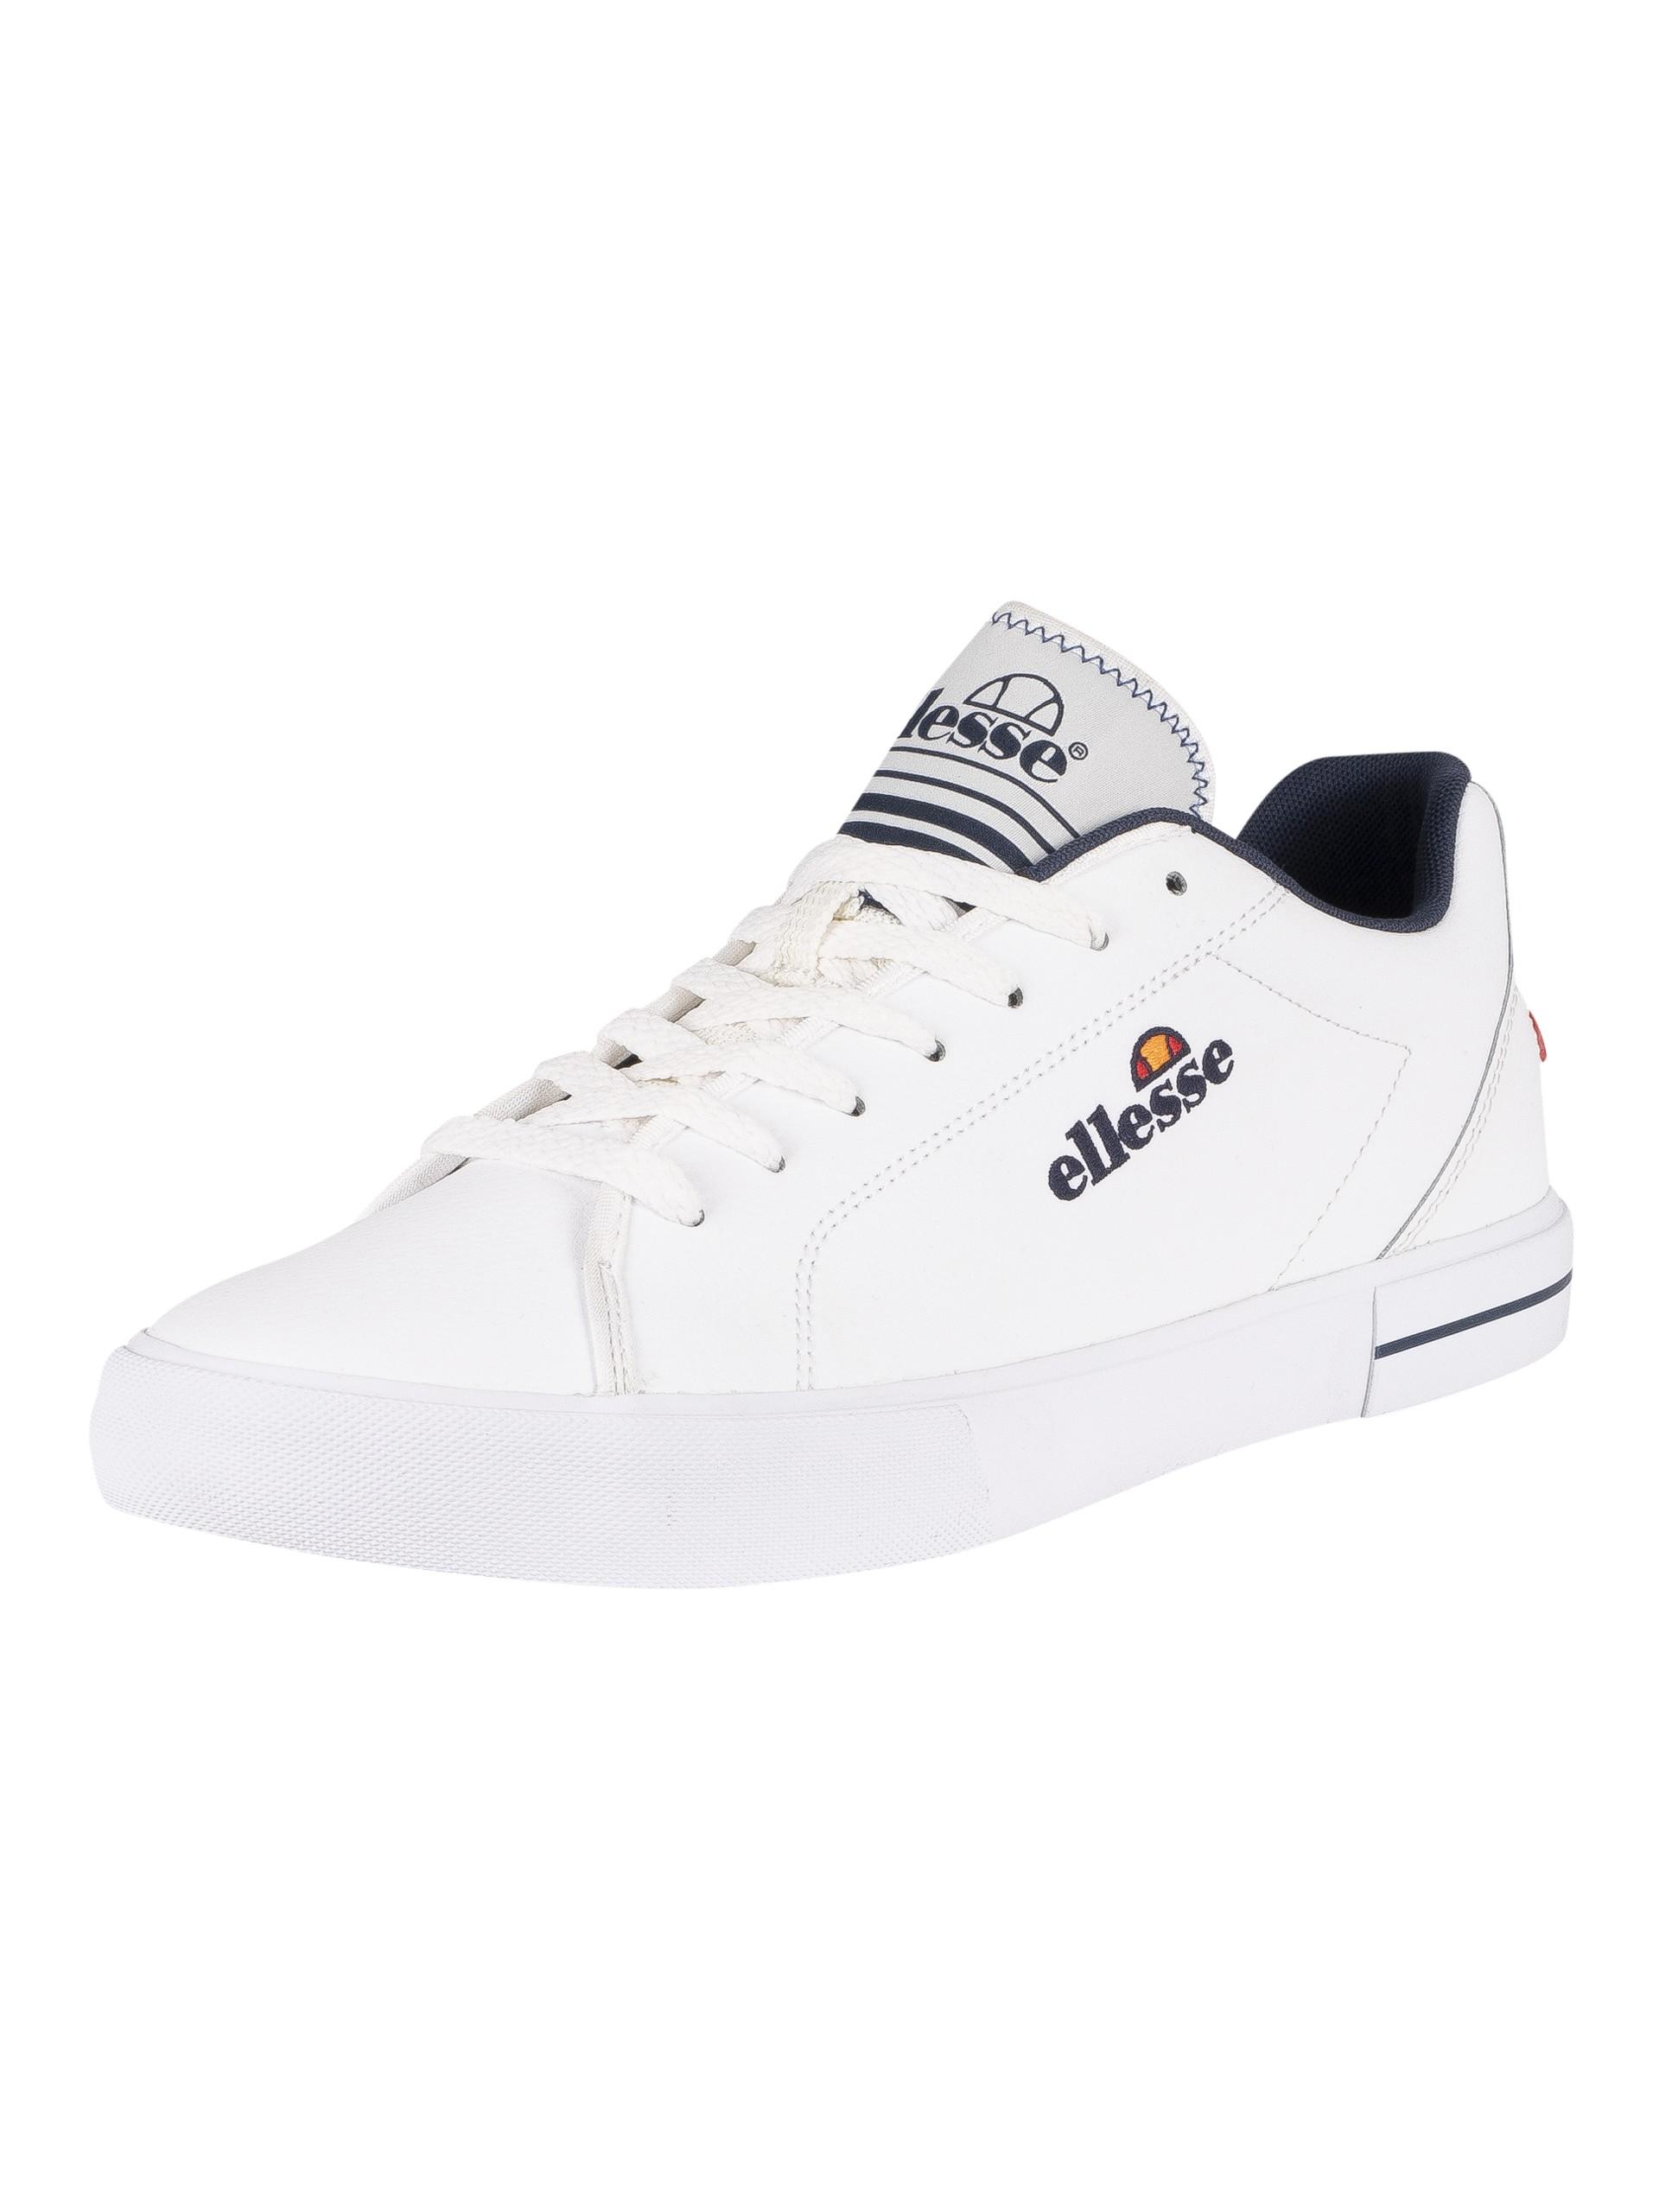 Ellesse Taggia Leather Trainers in for Men Lyst